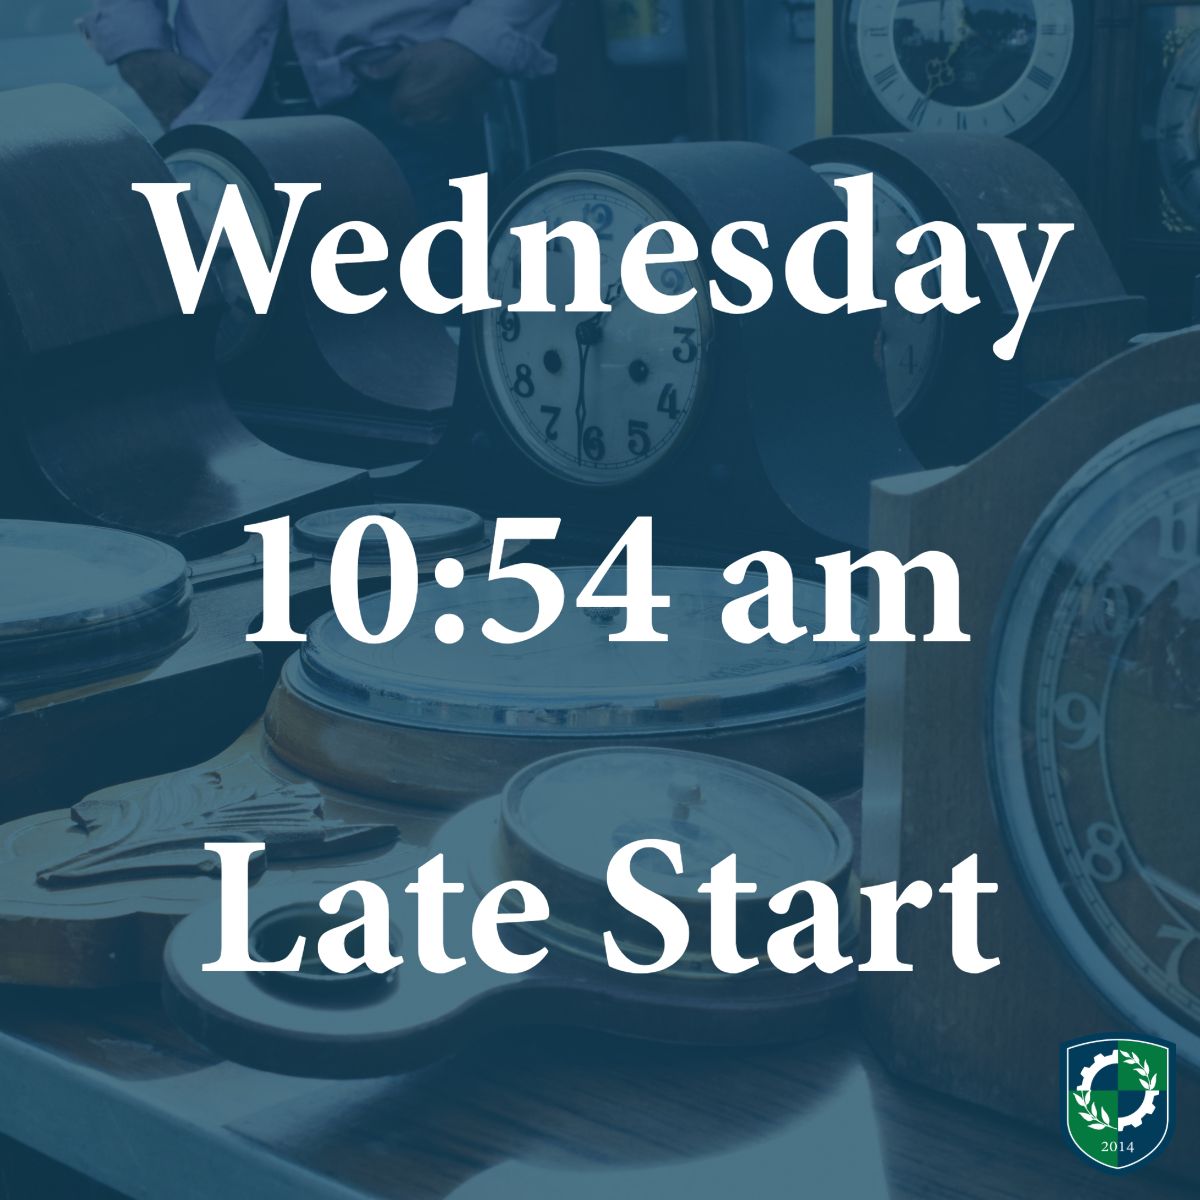 10:54 am Extended Late Start on Wednesday, 4.24.24. This means that on that day we will run classes A, B, and C. Bus pick-up times have been adjusted and are listed on the Transportation page of the website in the “Late Start” column.